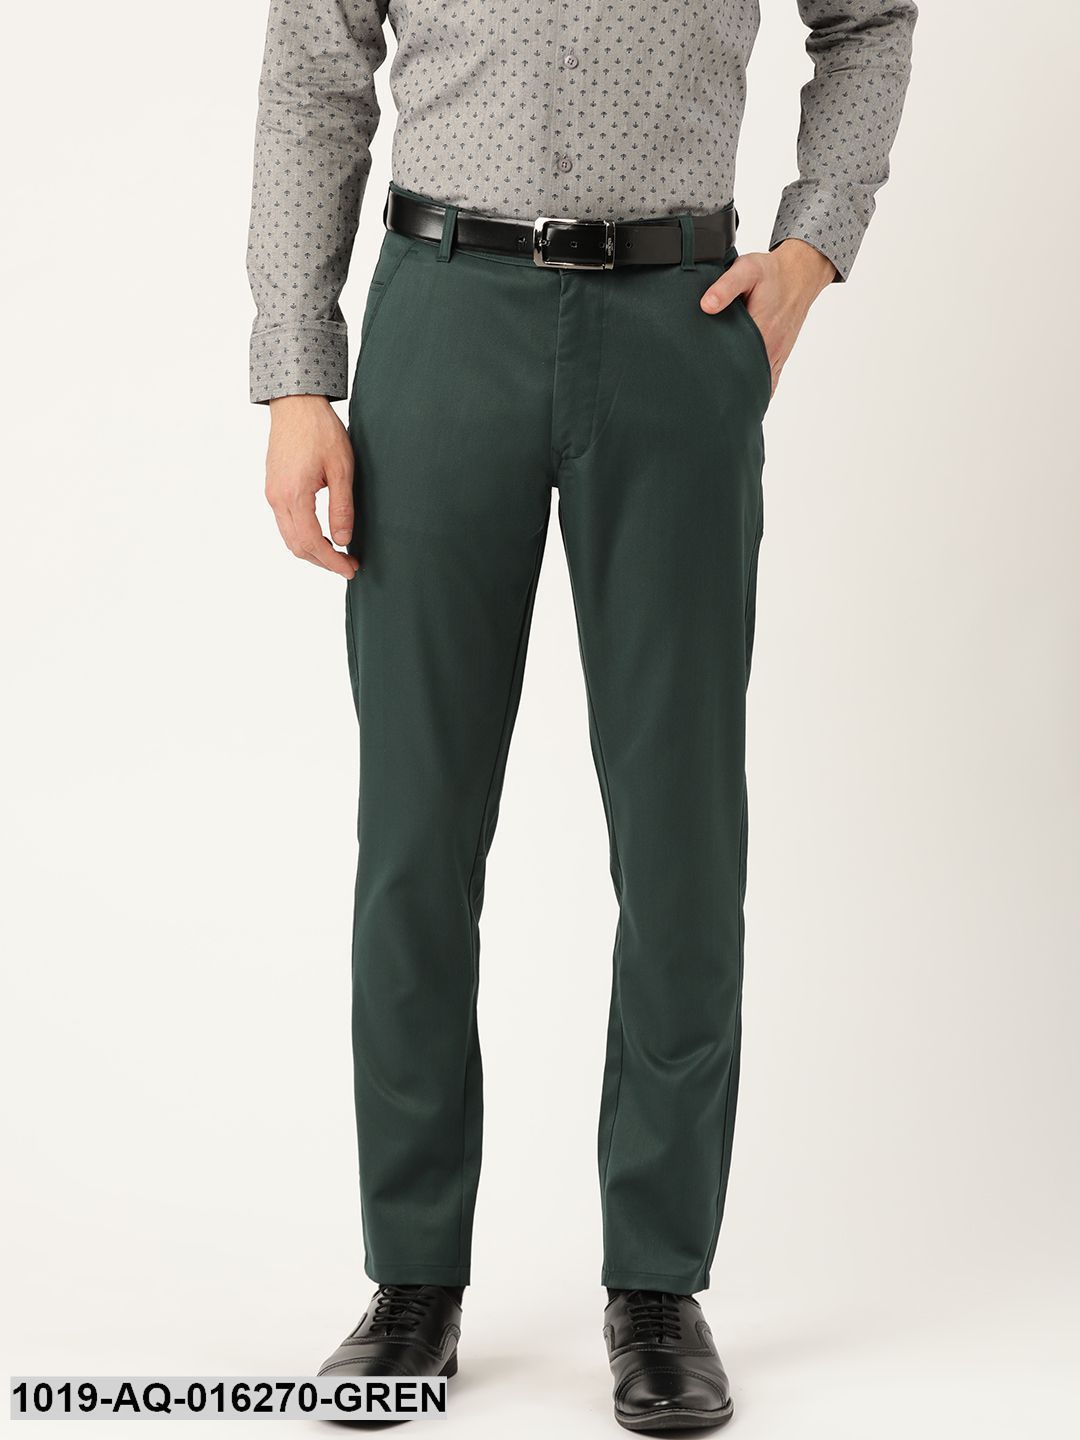 Men's Long Solid Color Bottle Green Trousers Casual Classic Basic Amer